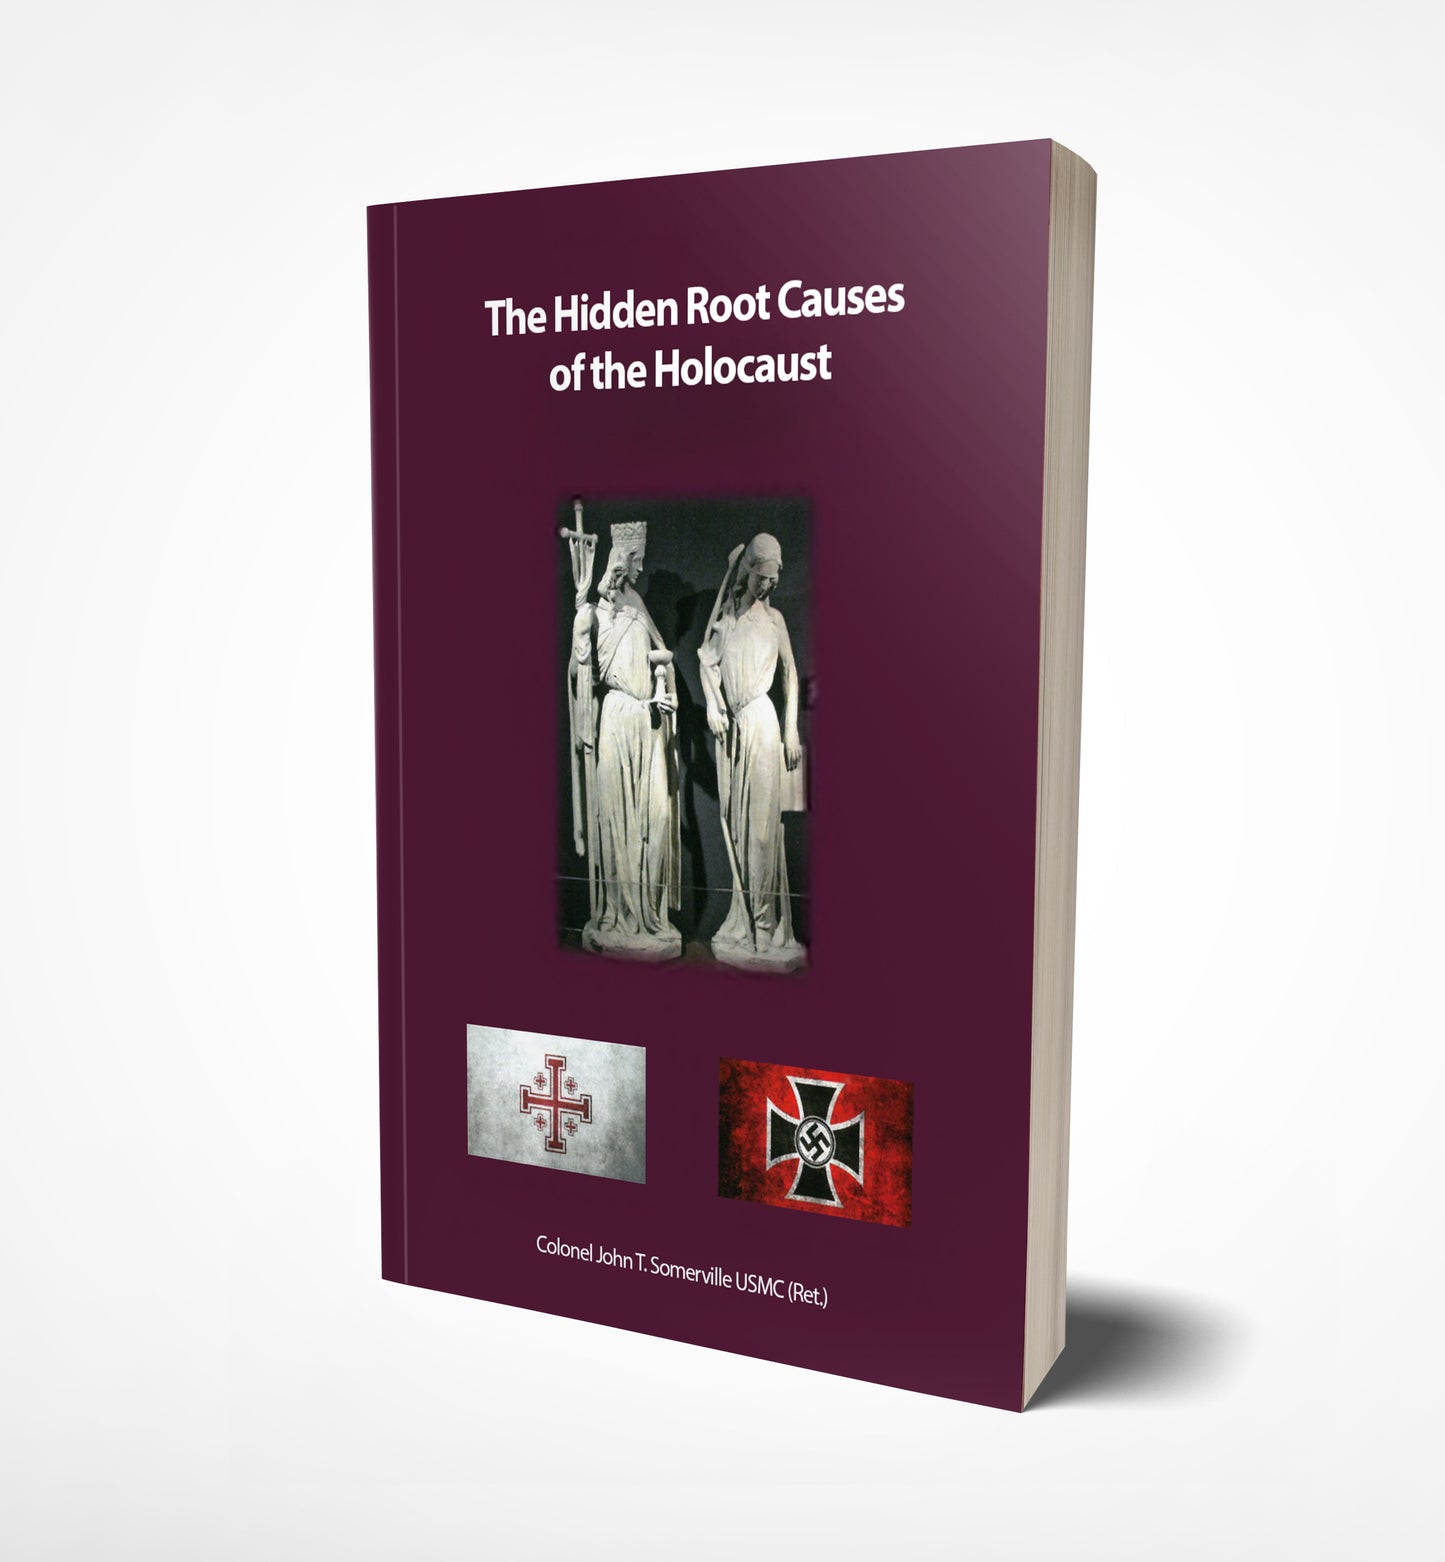 The Hidden Root Causes of the Holocaust by Colonel John T. Somerville USMC (Ret.)-book